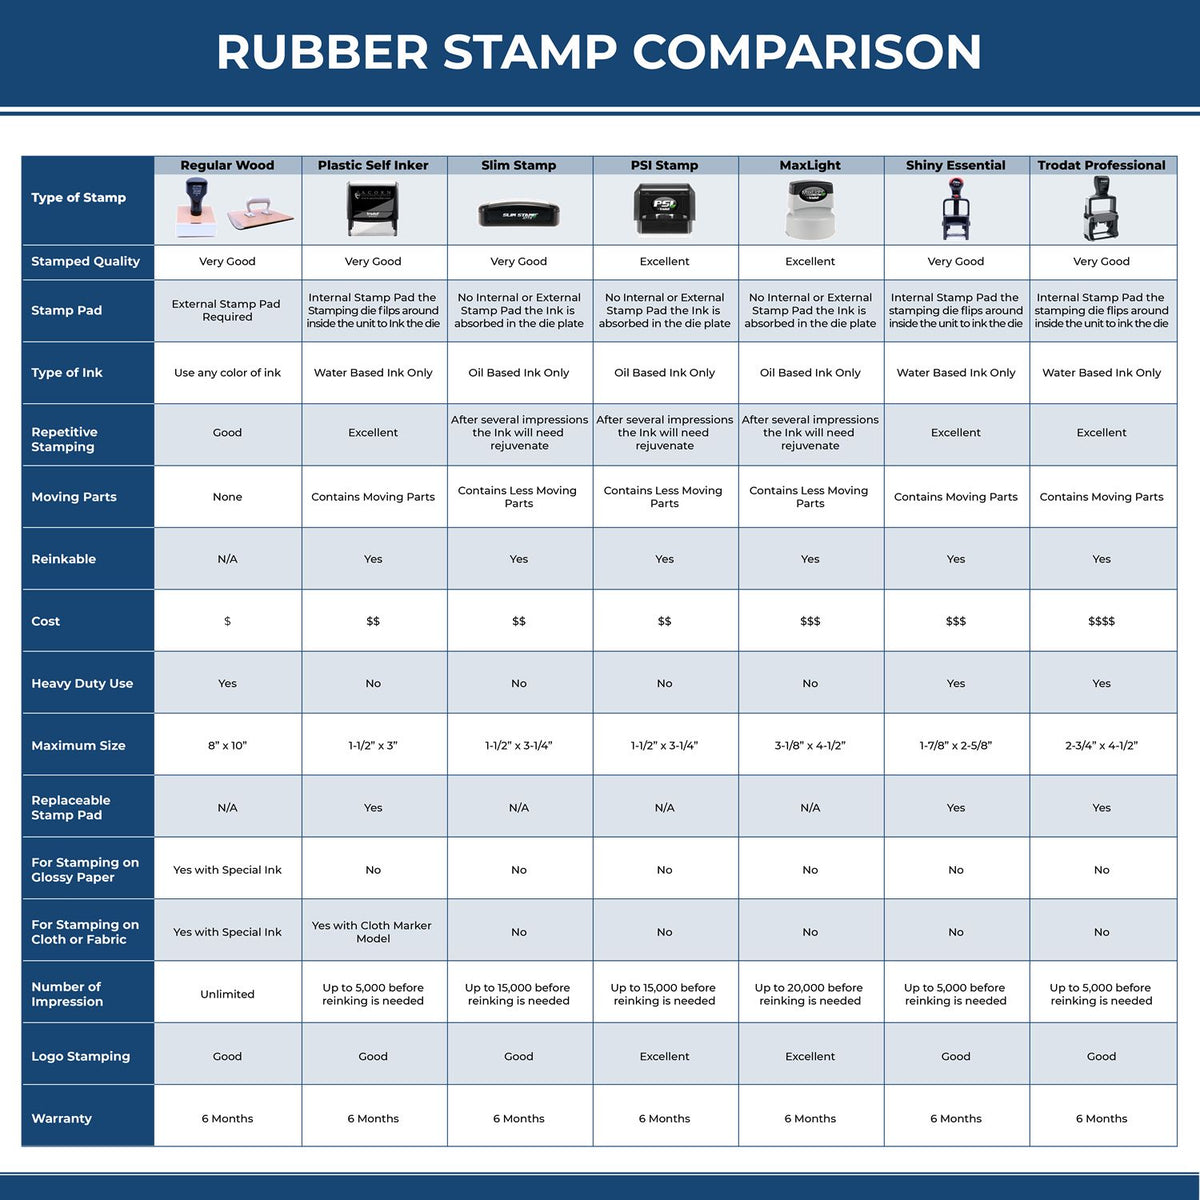 Large Self-Inking Spoiled Stamp 5594S Rubber Stamp Comparison